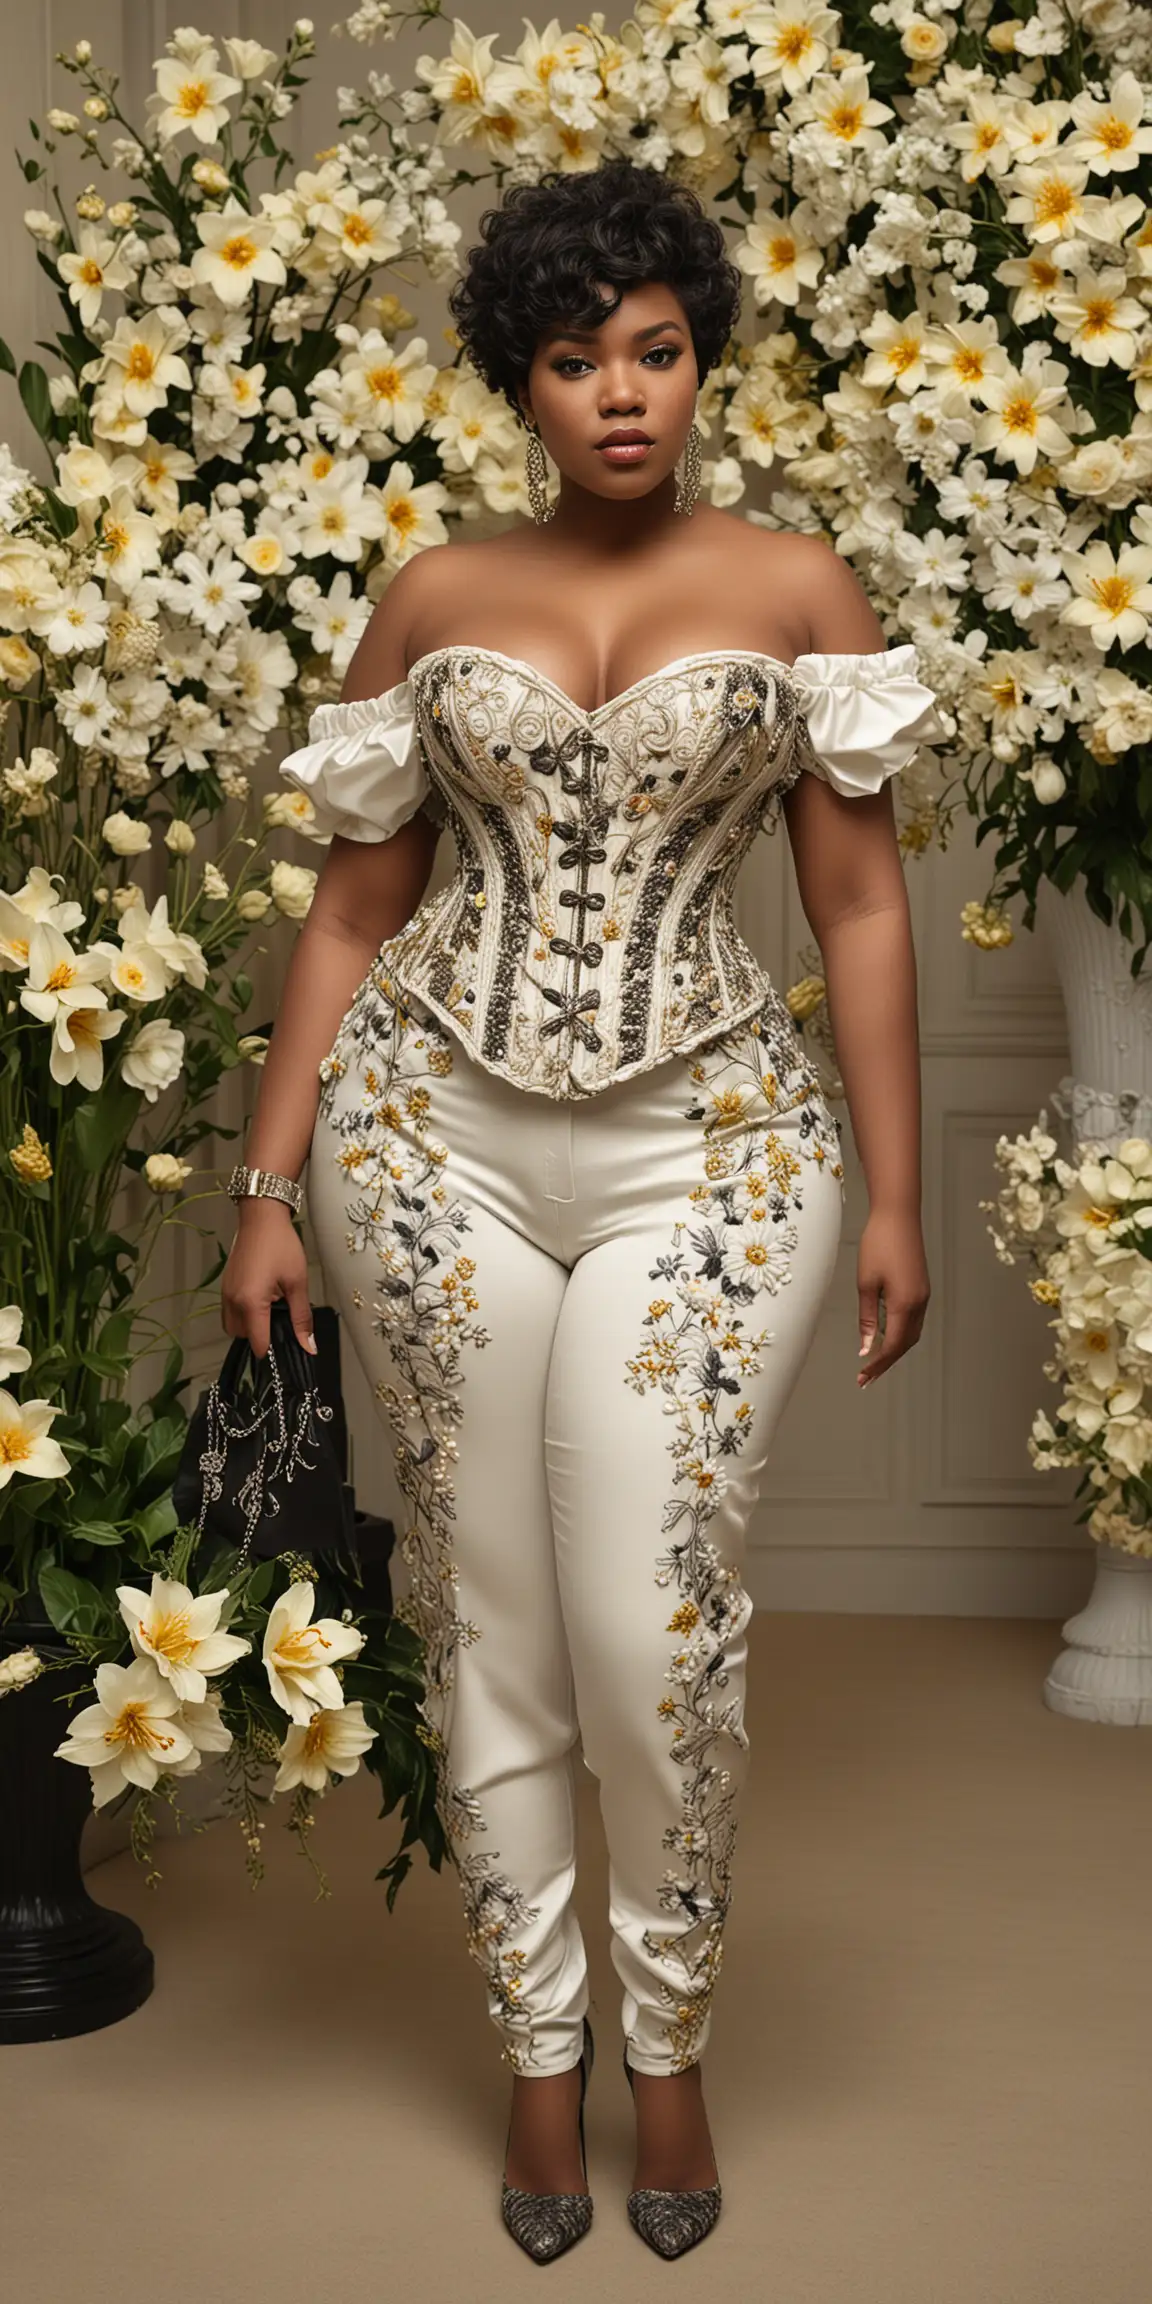 A professional, vivid, high-res photograph with a 75:128 ar, q 4, & a dramatic, wide-angle perspective, set at the Met Gala, with flowers, showcases a stunning, plus-size, African model with pixie haircut.
She's dressed in an intricately designed, bold, high-fashion off-the-shoulder jumpsuit with HD floral embroidery, waist cinching (corset), high-res detail in shades of white, black, ash & grey. She poses, carrying a velvet purse, wearing exotic jewelry and white (or yellow) Louboutin heels. The image is crisp, sharp, and in HD, HDR.